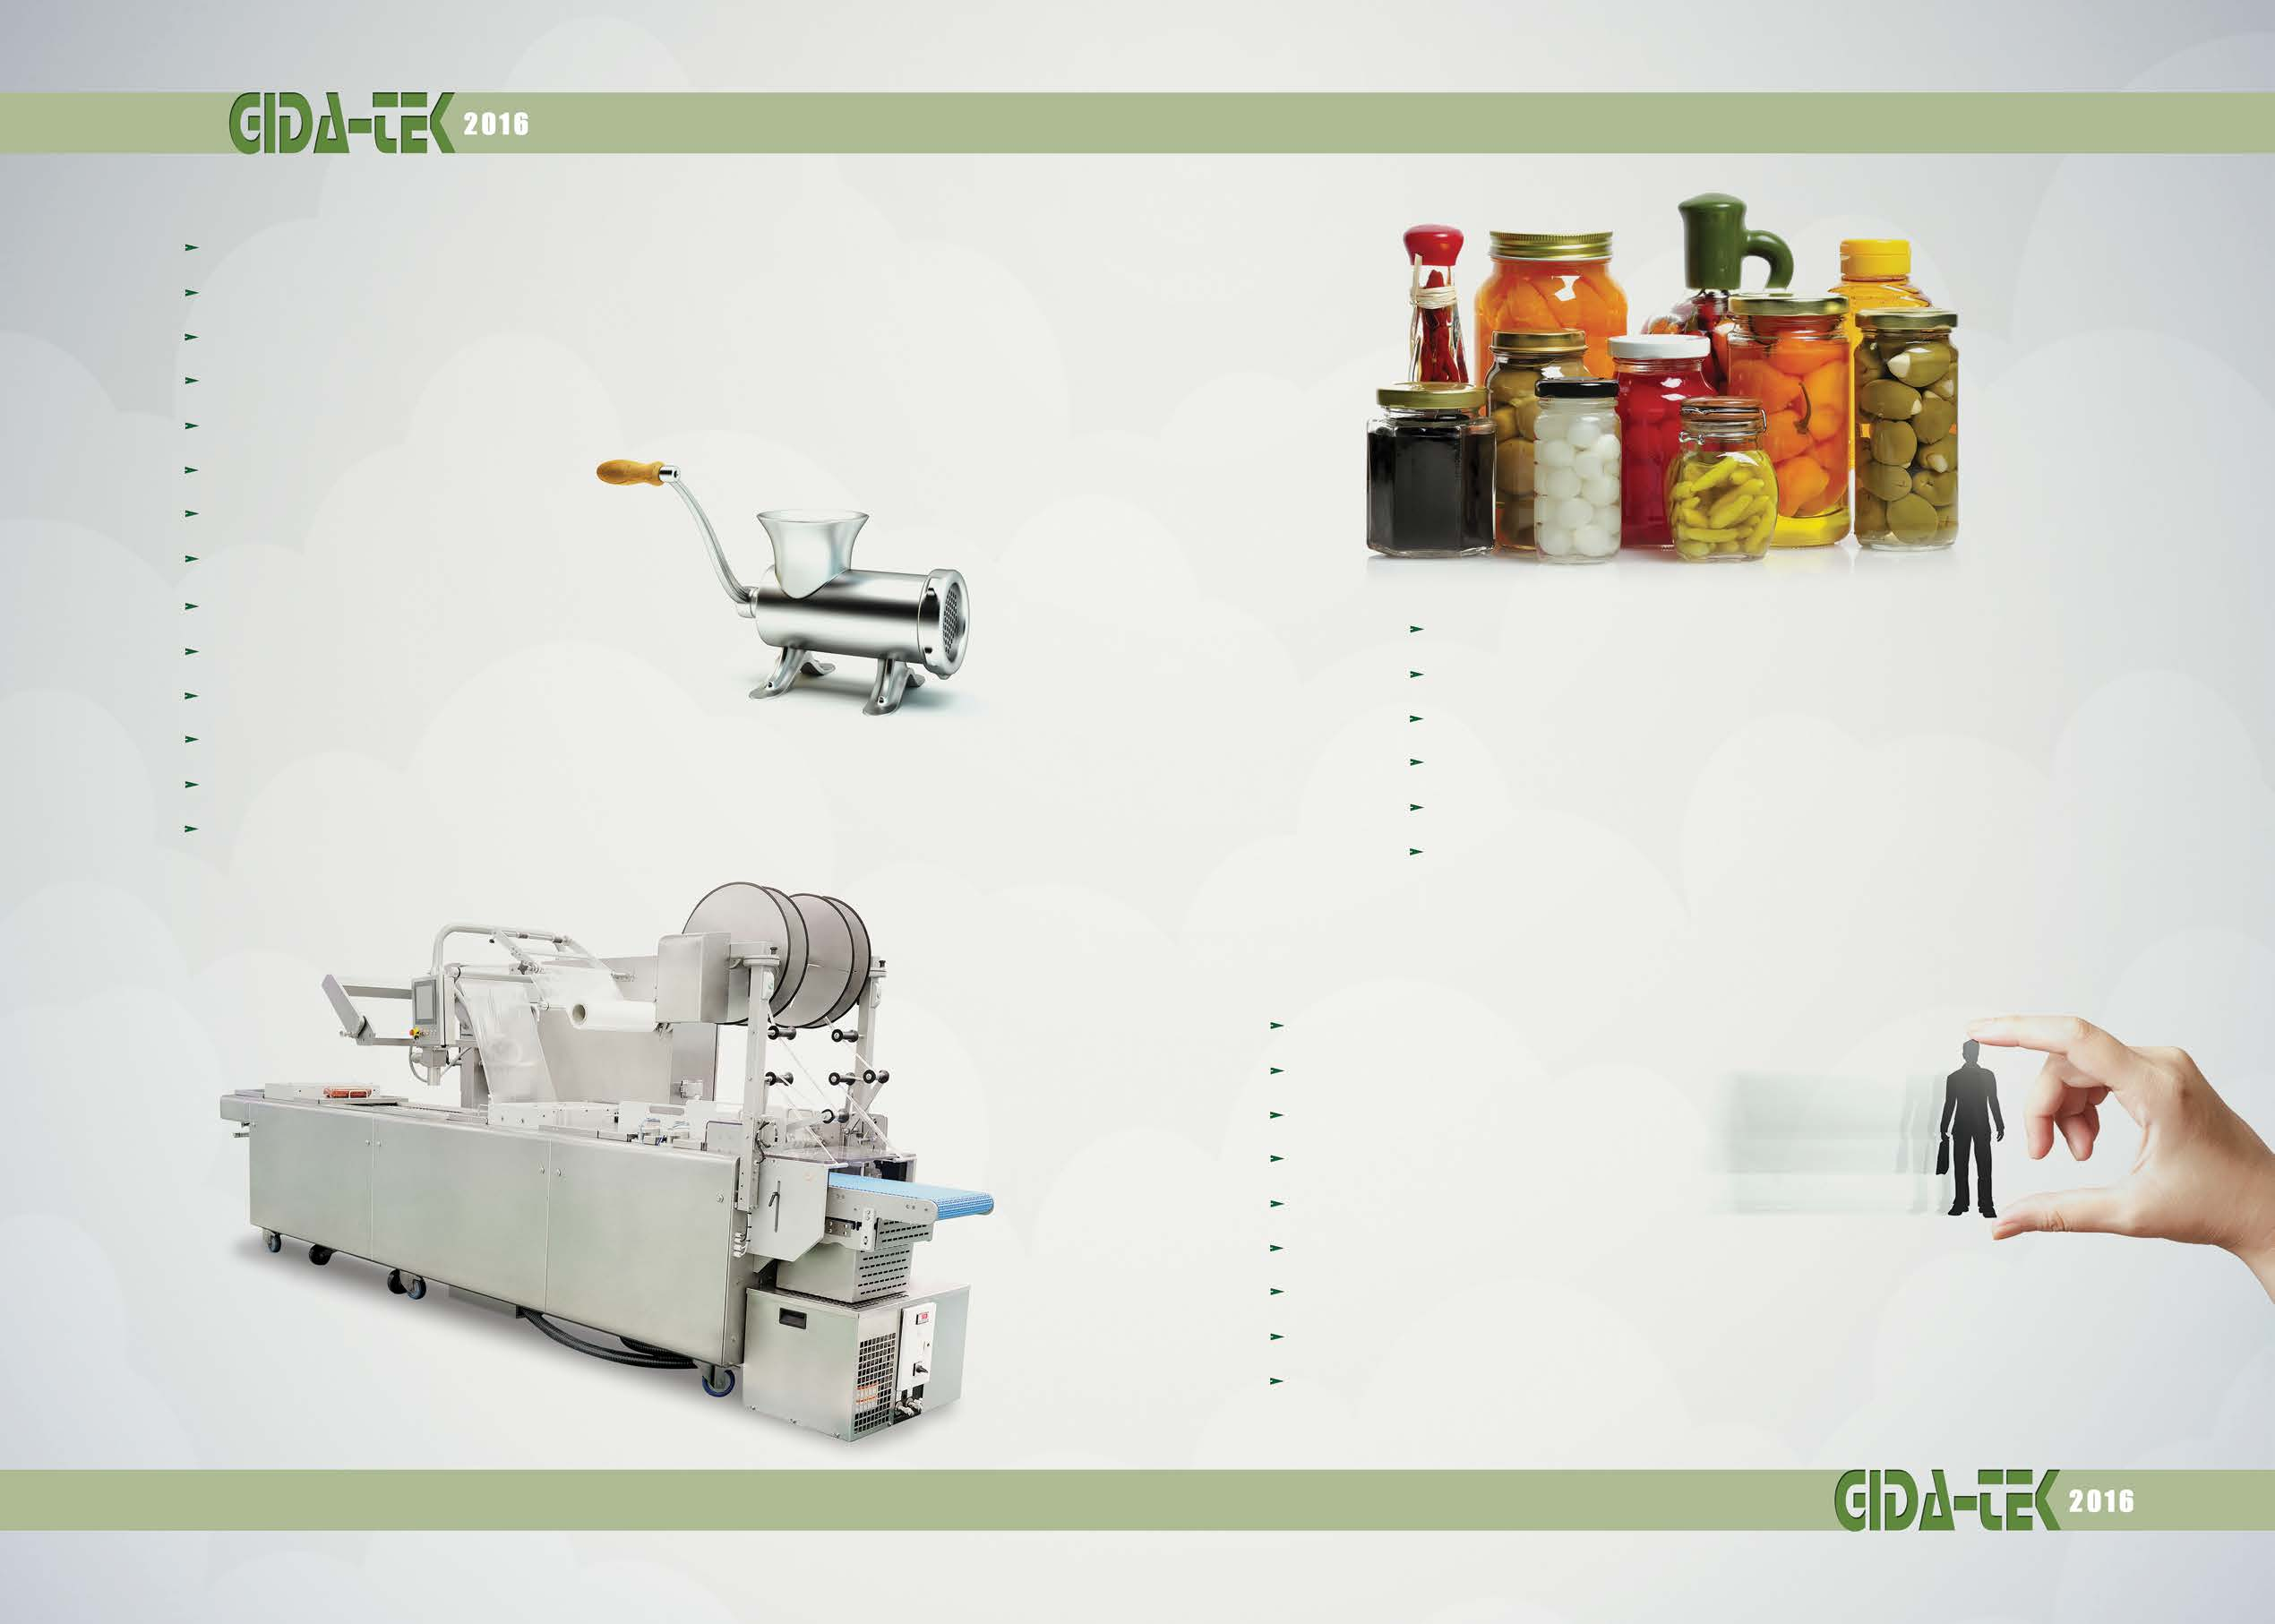 Meat cutting machine and equipment Market shelf and exhibition equipment Catering equipment Flour dressing, dough kneader and machine tool Weight and control systems Bakery and cake equipment